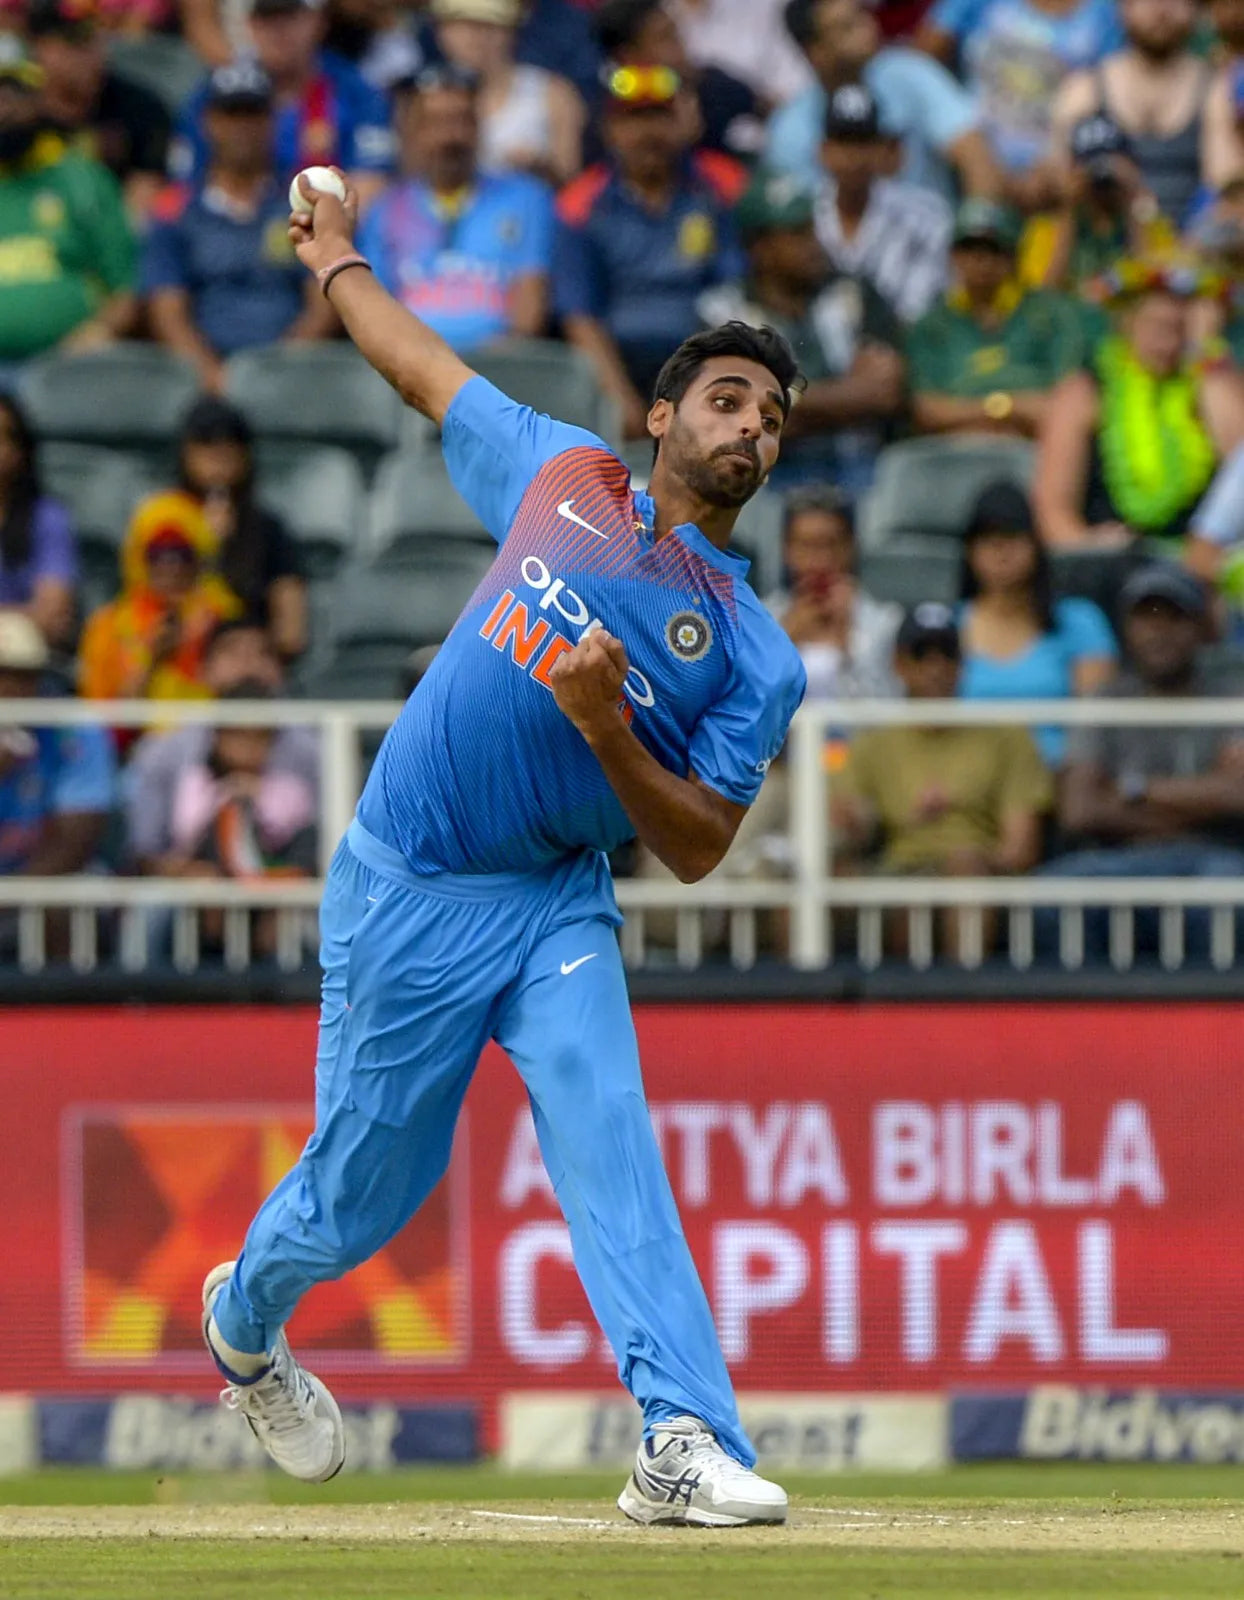 Bhuvaneshwar Kumar does his bowling action and bowls a swinging delivery